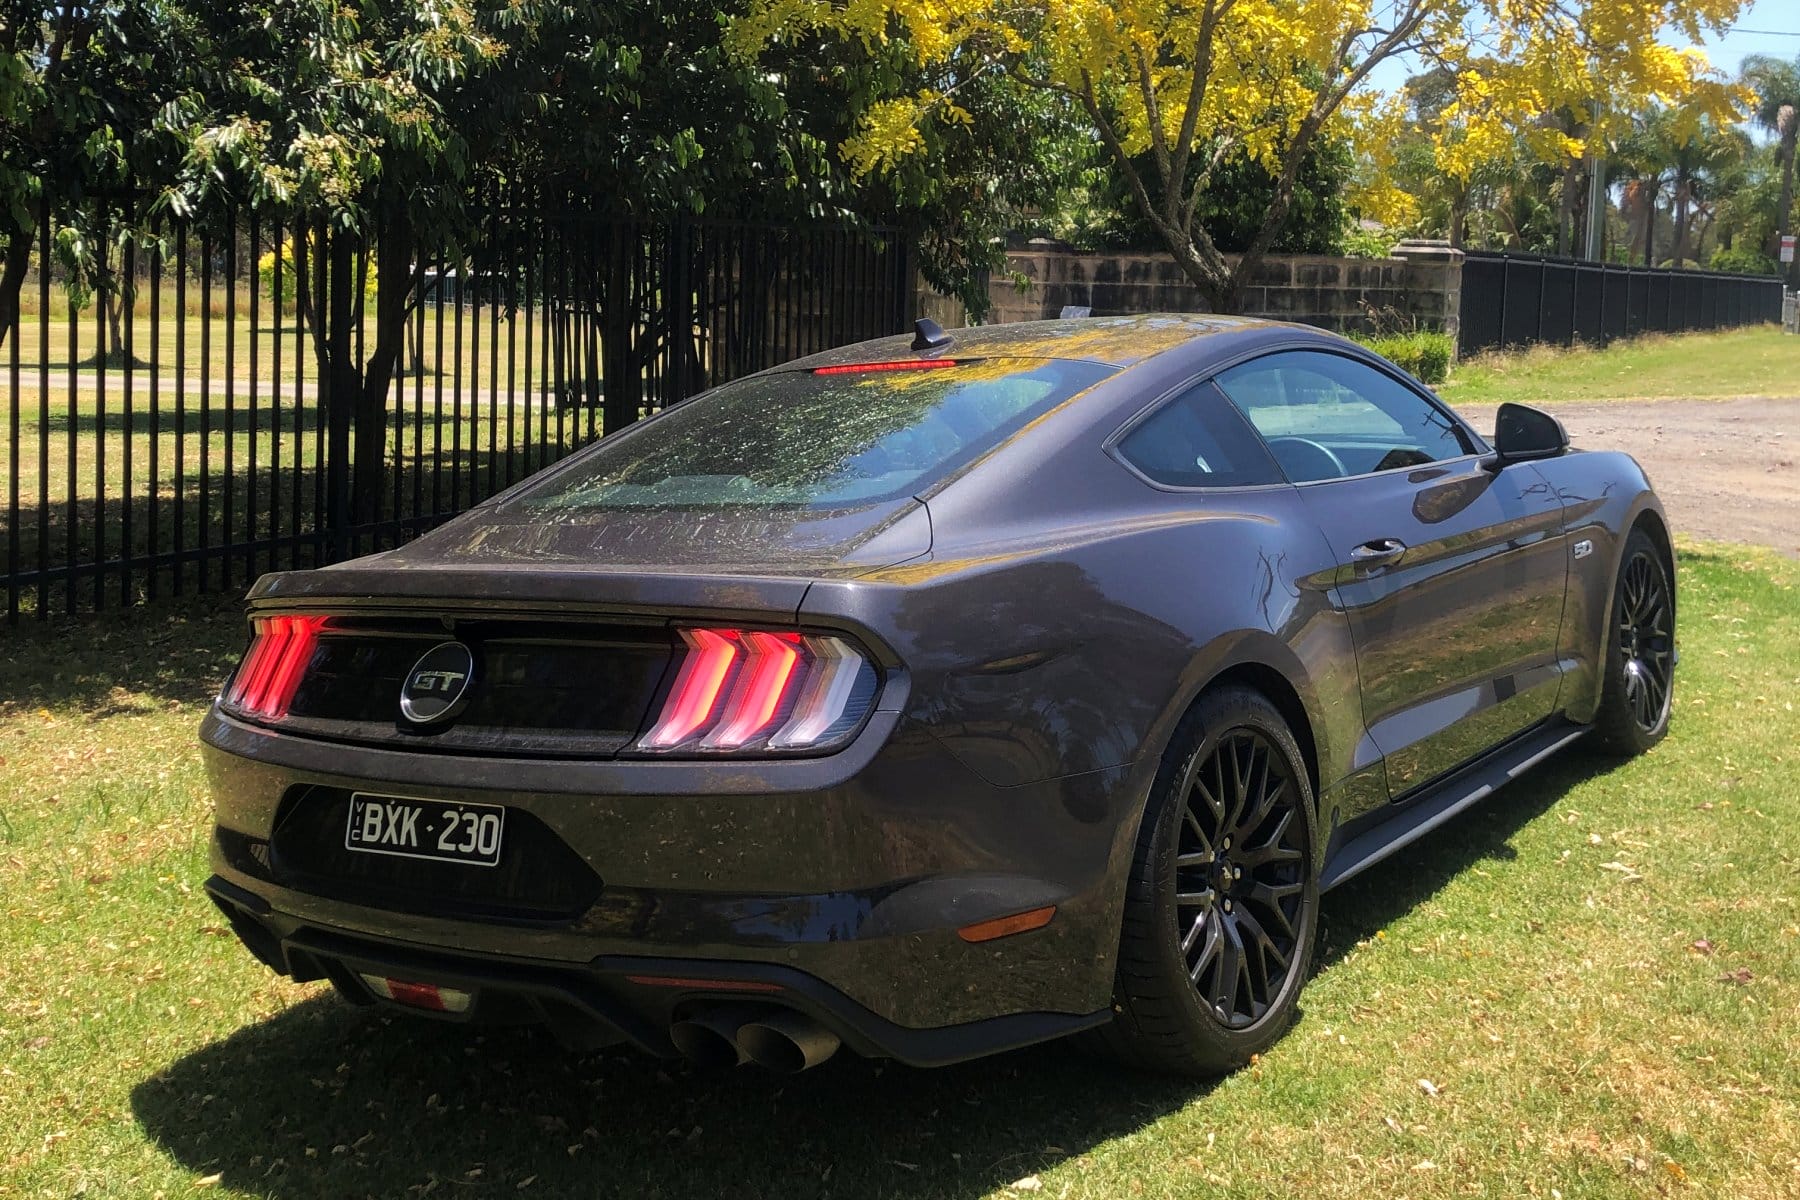 2022 Ford Mustang GT V8 Coupe rear qtr